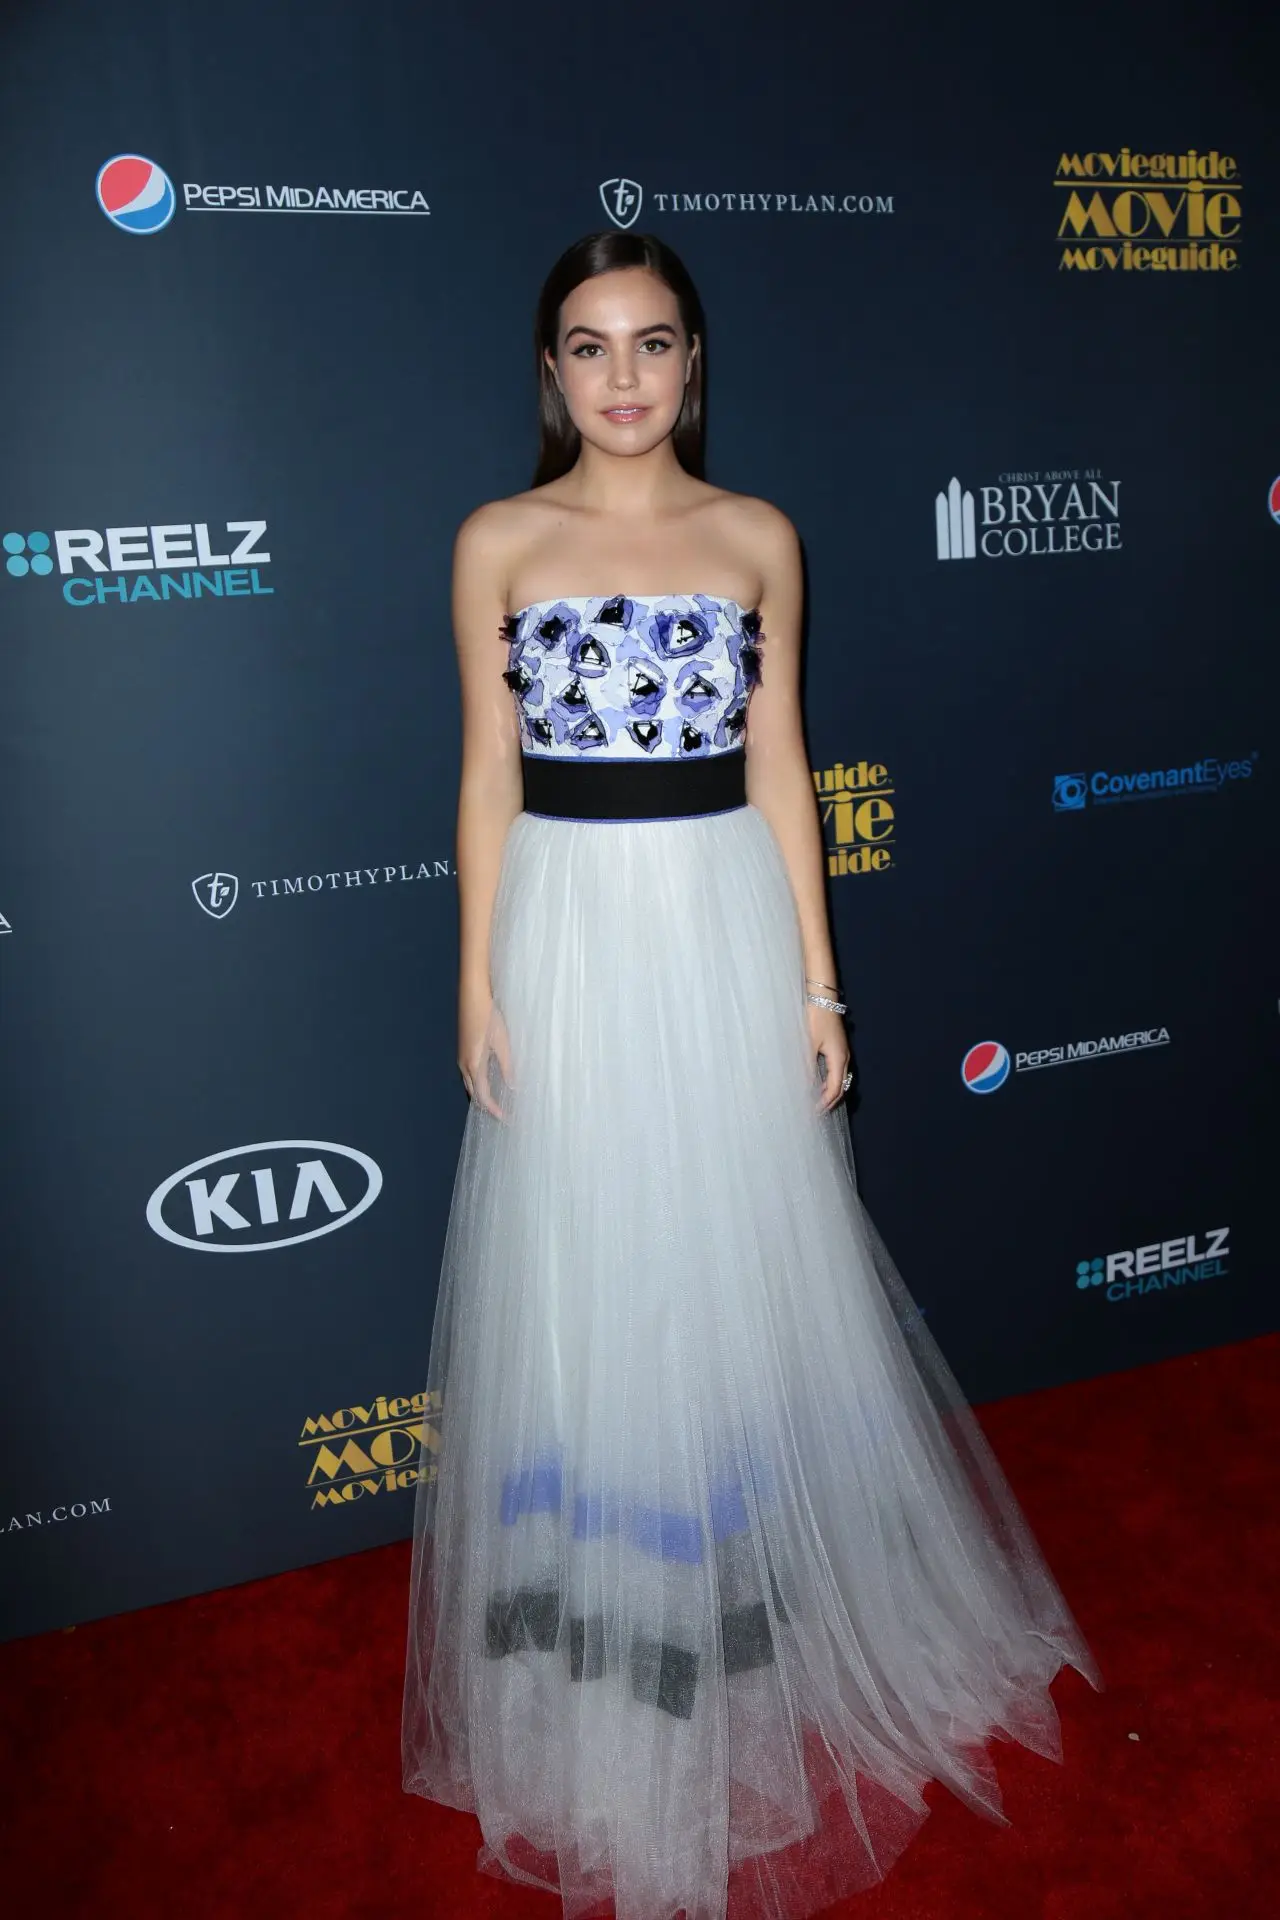 BAILEE MADISON AT 25TH ANNUAL MOVIEGUIDE AWARDS IN UNIVERSAL CITY10